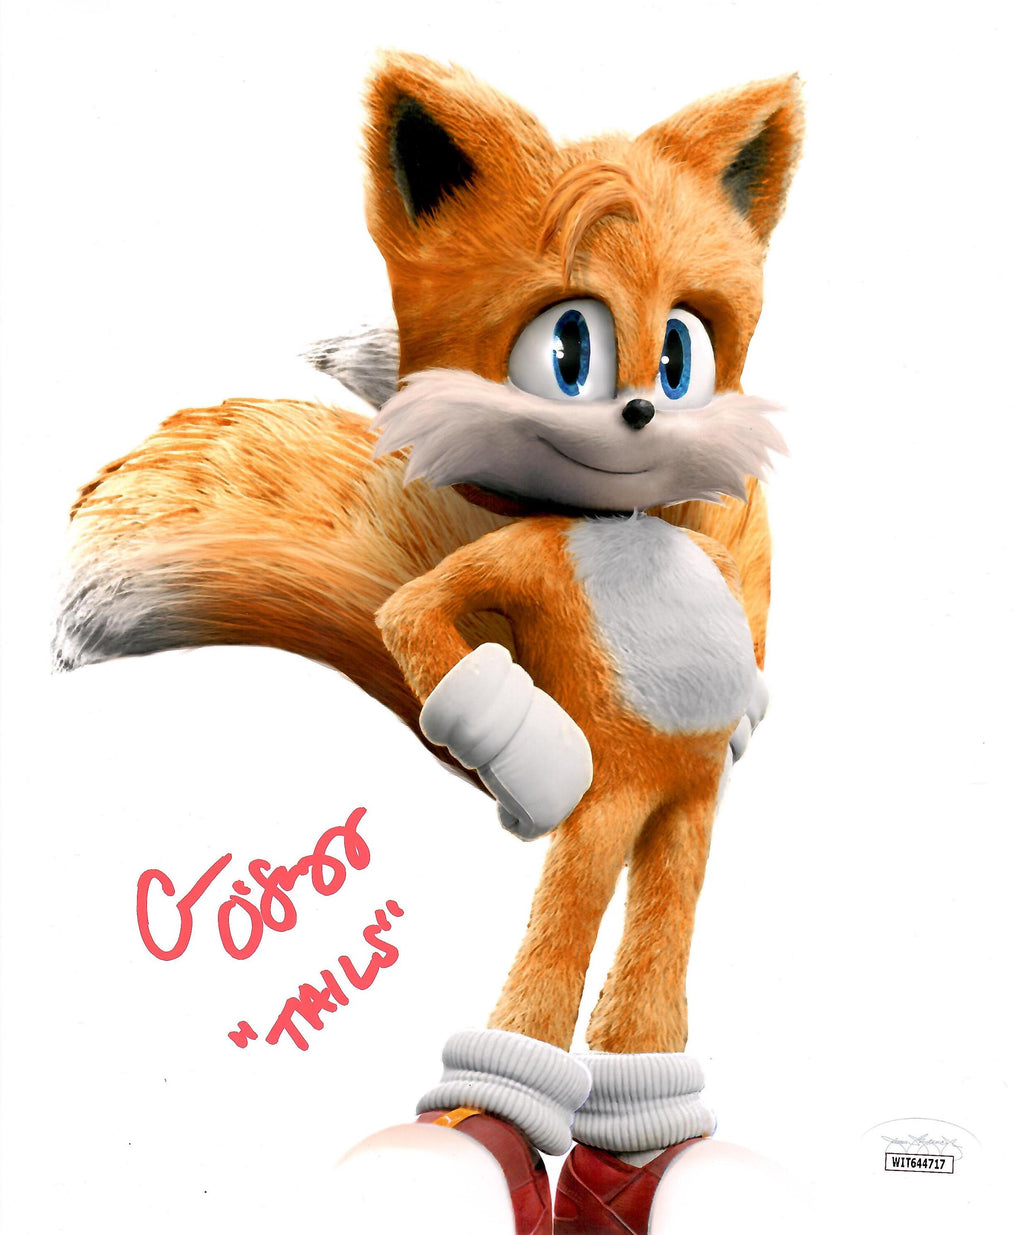 Colleen Oshaughnessy autograph 8x10 Photo inscribed "Tails"  JSA COA Sonic The Hedgehog